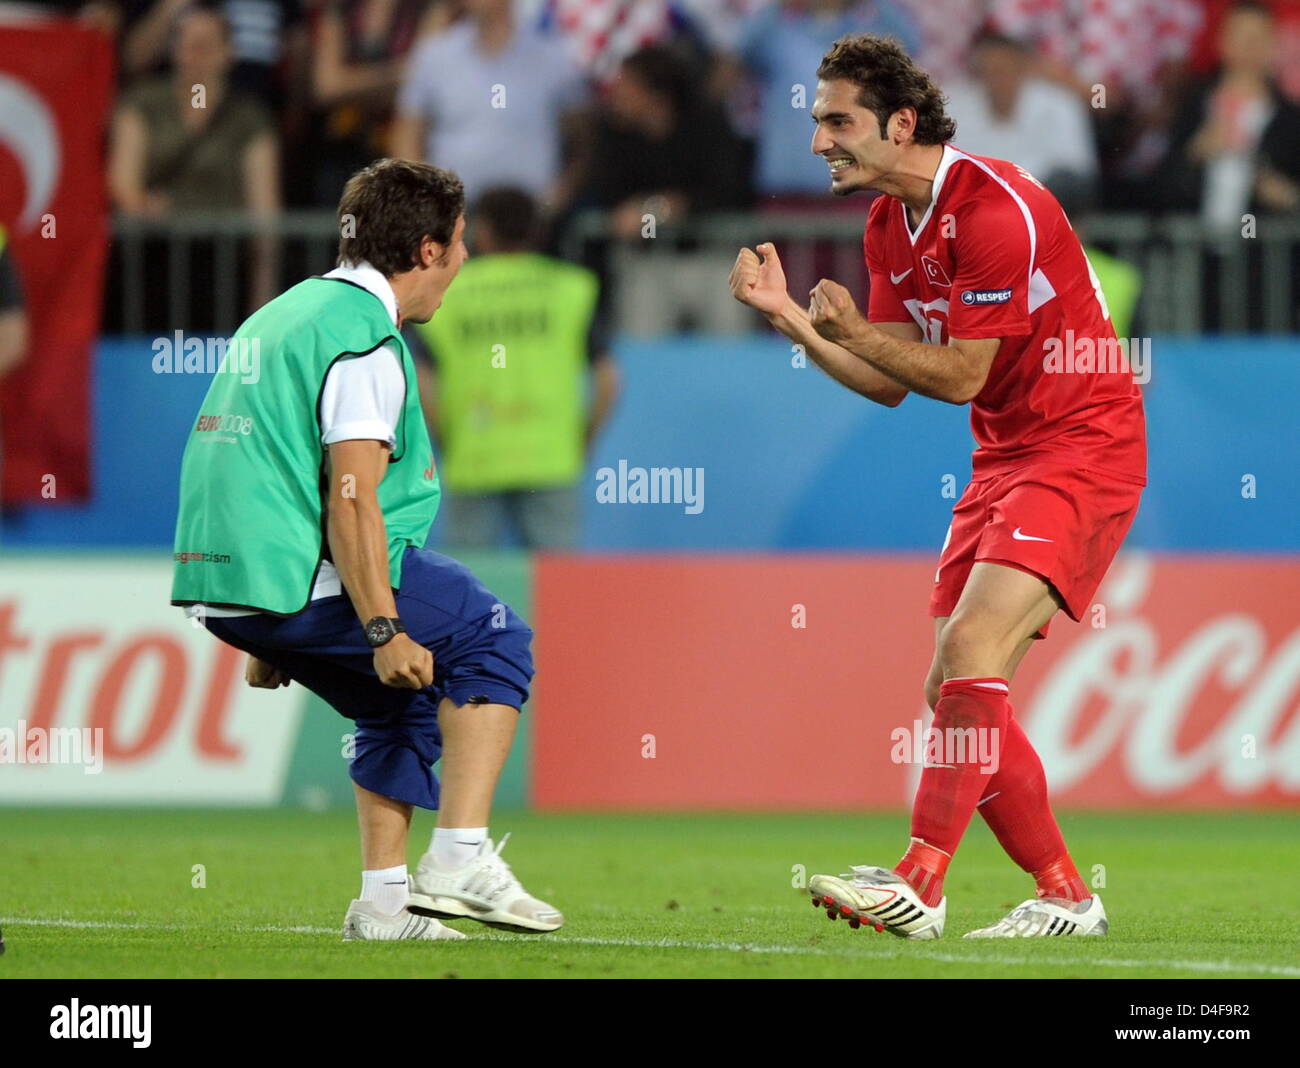 Hamit Altintop of Turkey jubilates with a teammate after the UEFA EURO 2008 quarter final match between Croatia and Turkey at the Ernst Happel stadium in Vienna, Austria, 20 June 2008. Turkey won 1:3 in penalty shootout. Photo: Achim Scheidemann dpa +please note UEFA restrictions particulary in regard to slide shows and 'No Mobile Services'+ +++(c) dpa - Bildfunk+++ Stock Photo